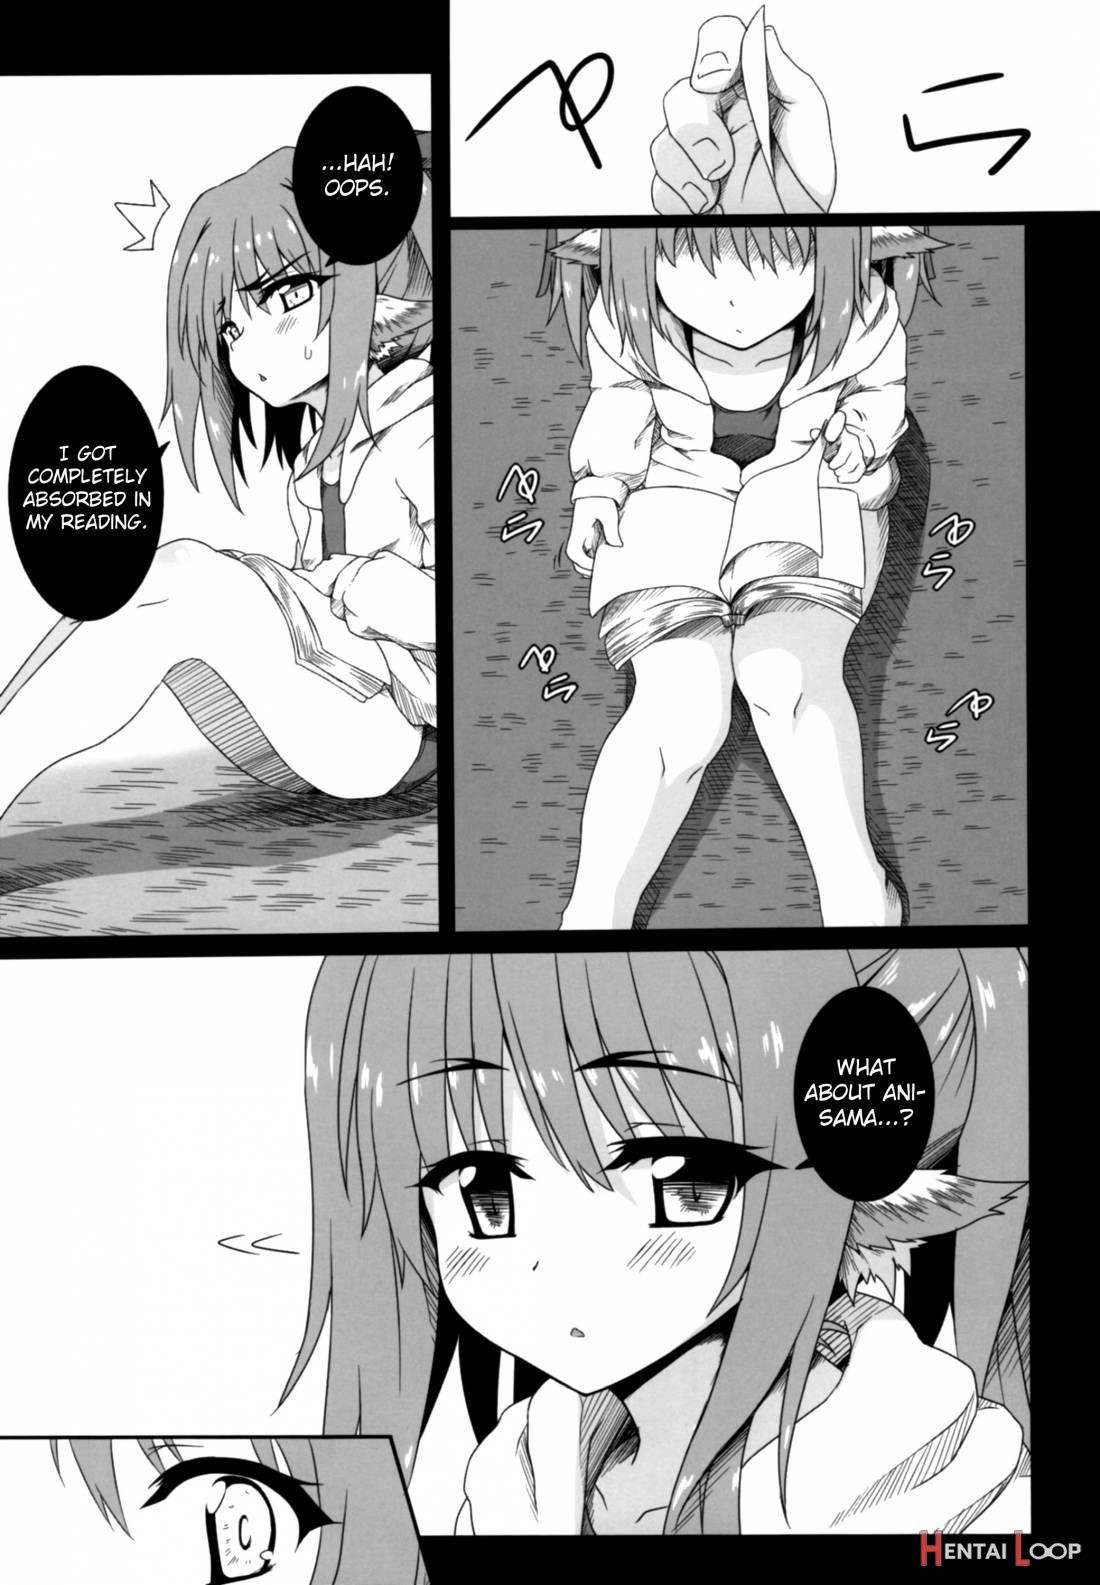 Nekone And The Everlasting Summer Vacation page 6